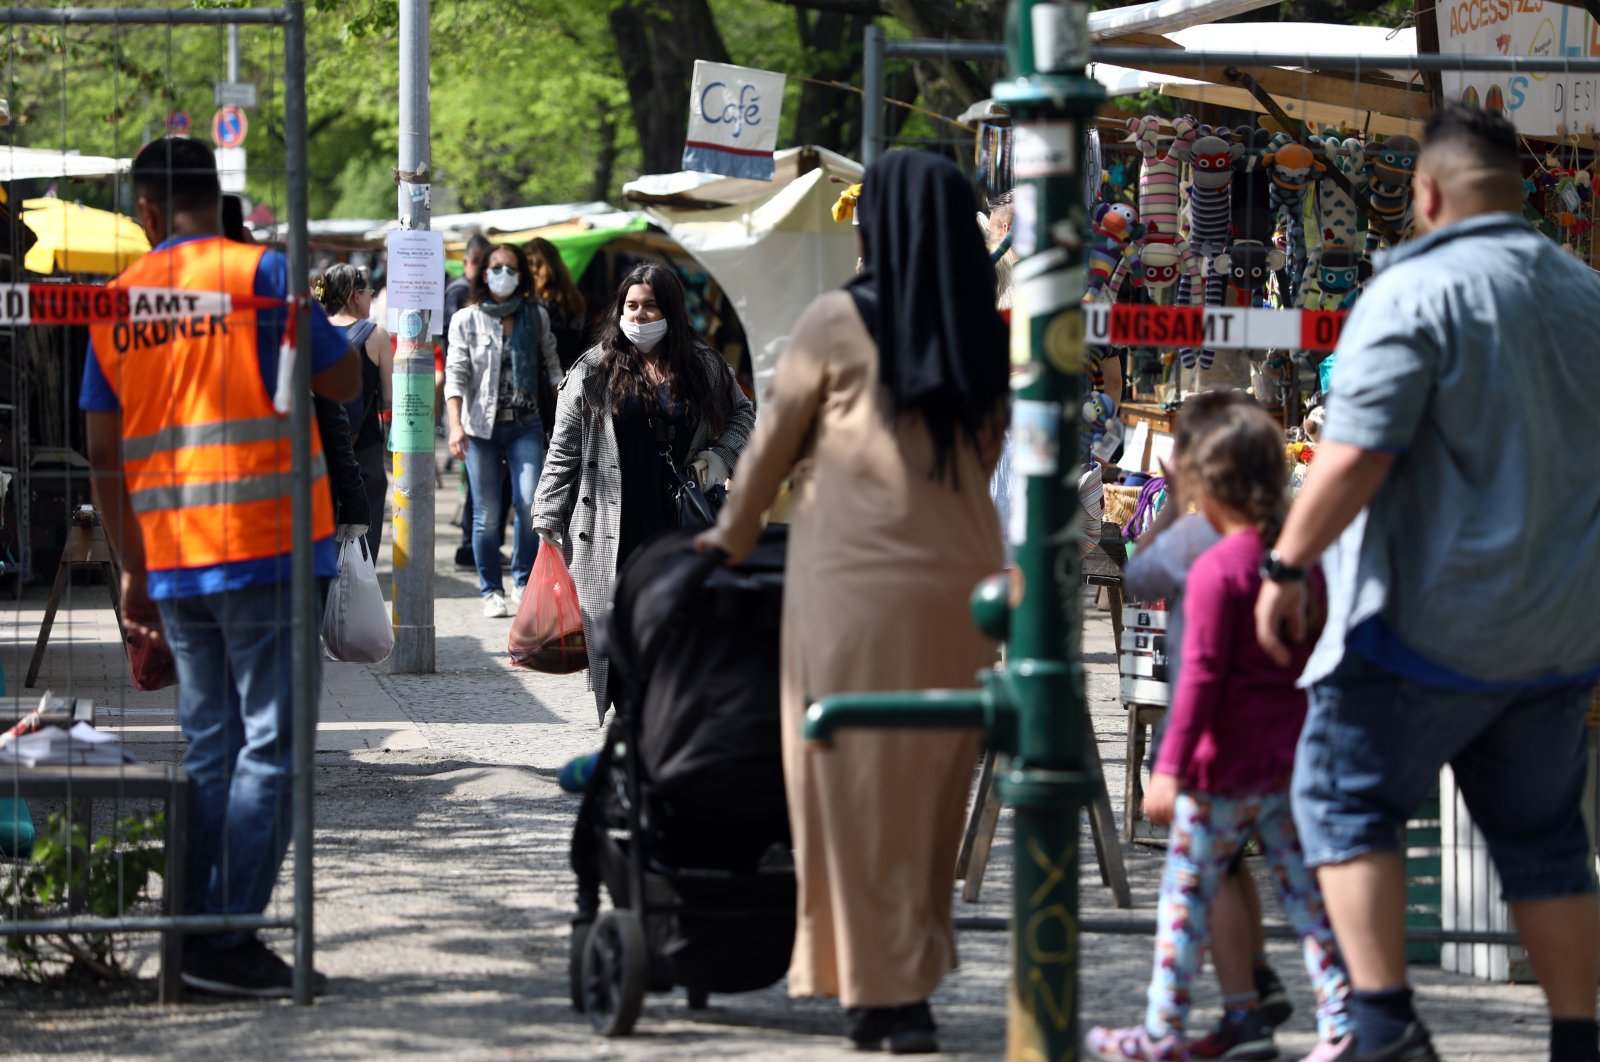 A steward regulates the access to a market at the Maybachufer in compliance with the current distance regulations, as the spread of the coronavirus disease (COVID-19) continues in Berlin, Germany, April 28, 2020. (Reuters Photo)